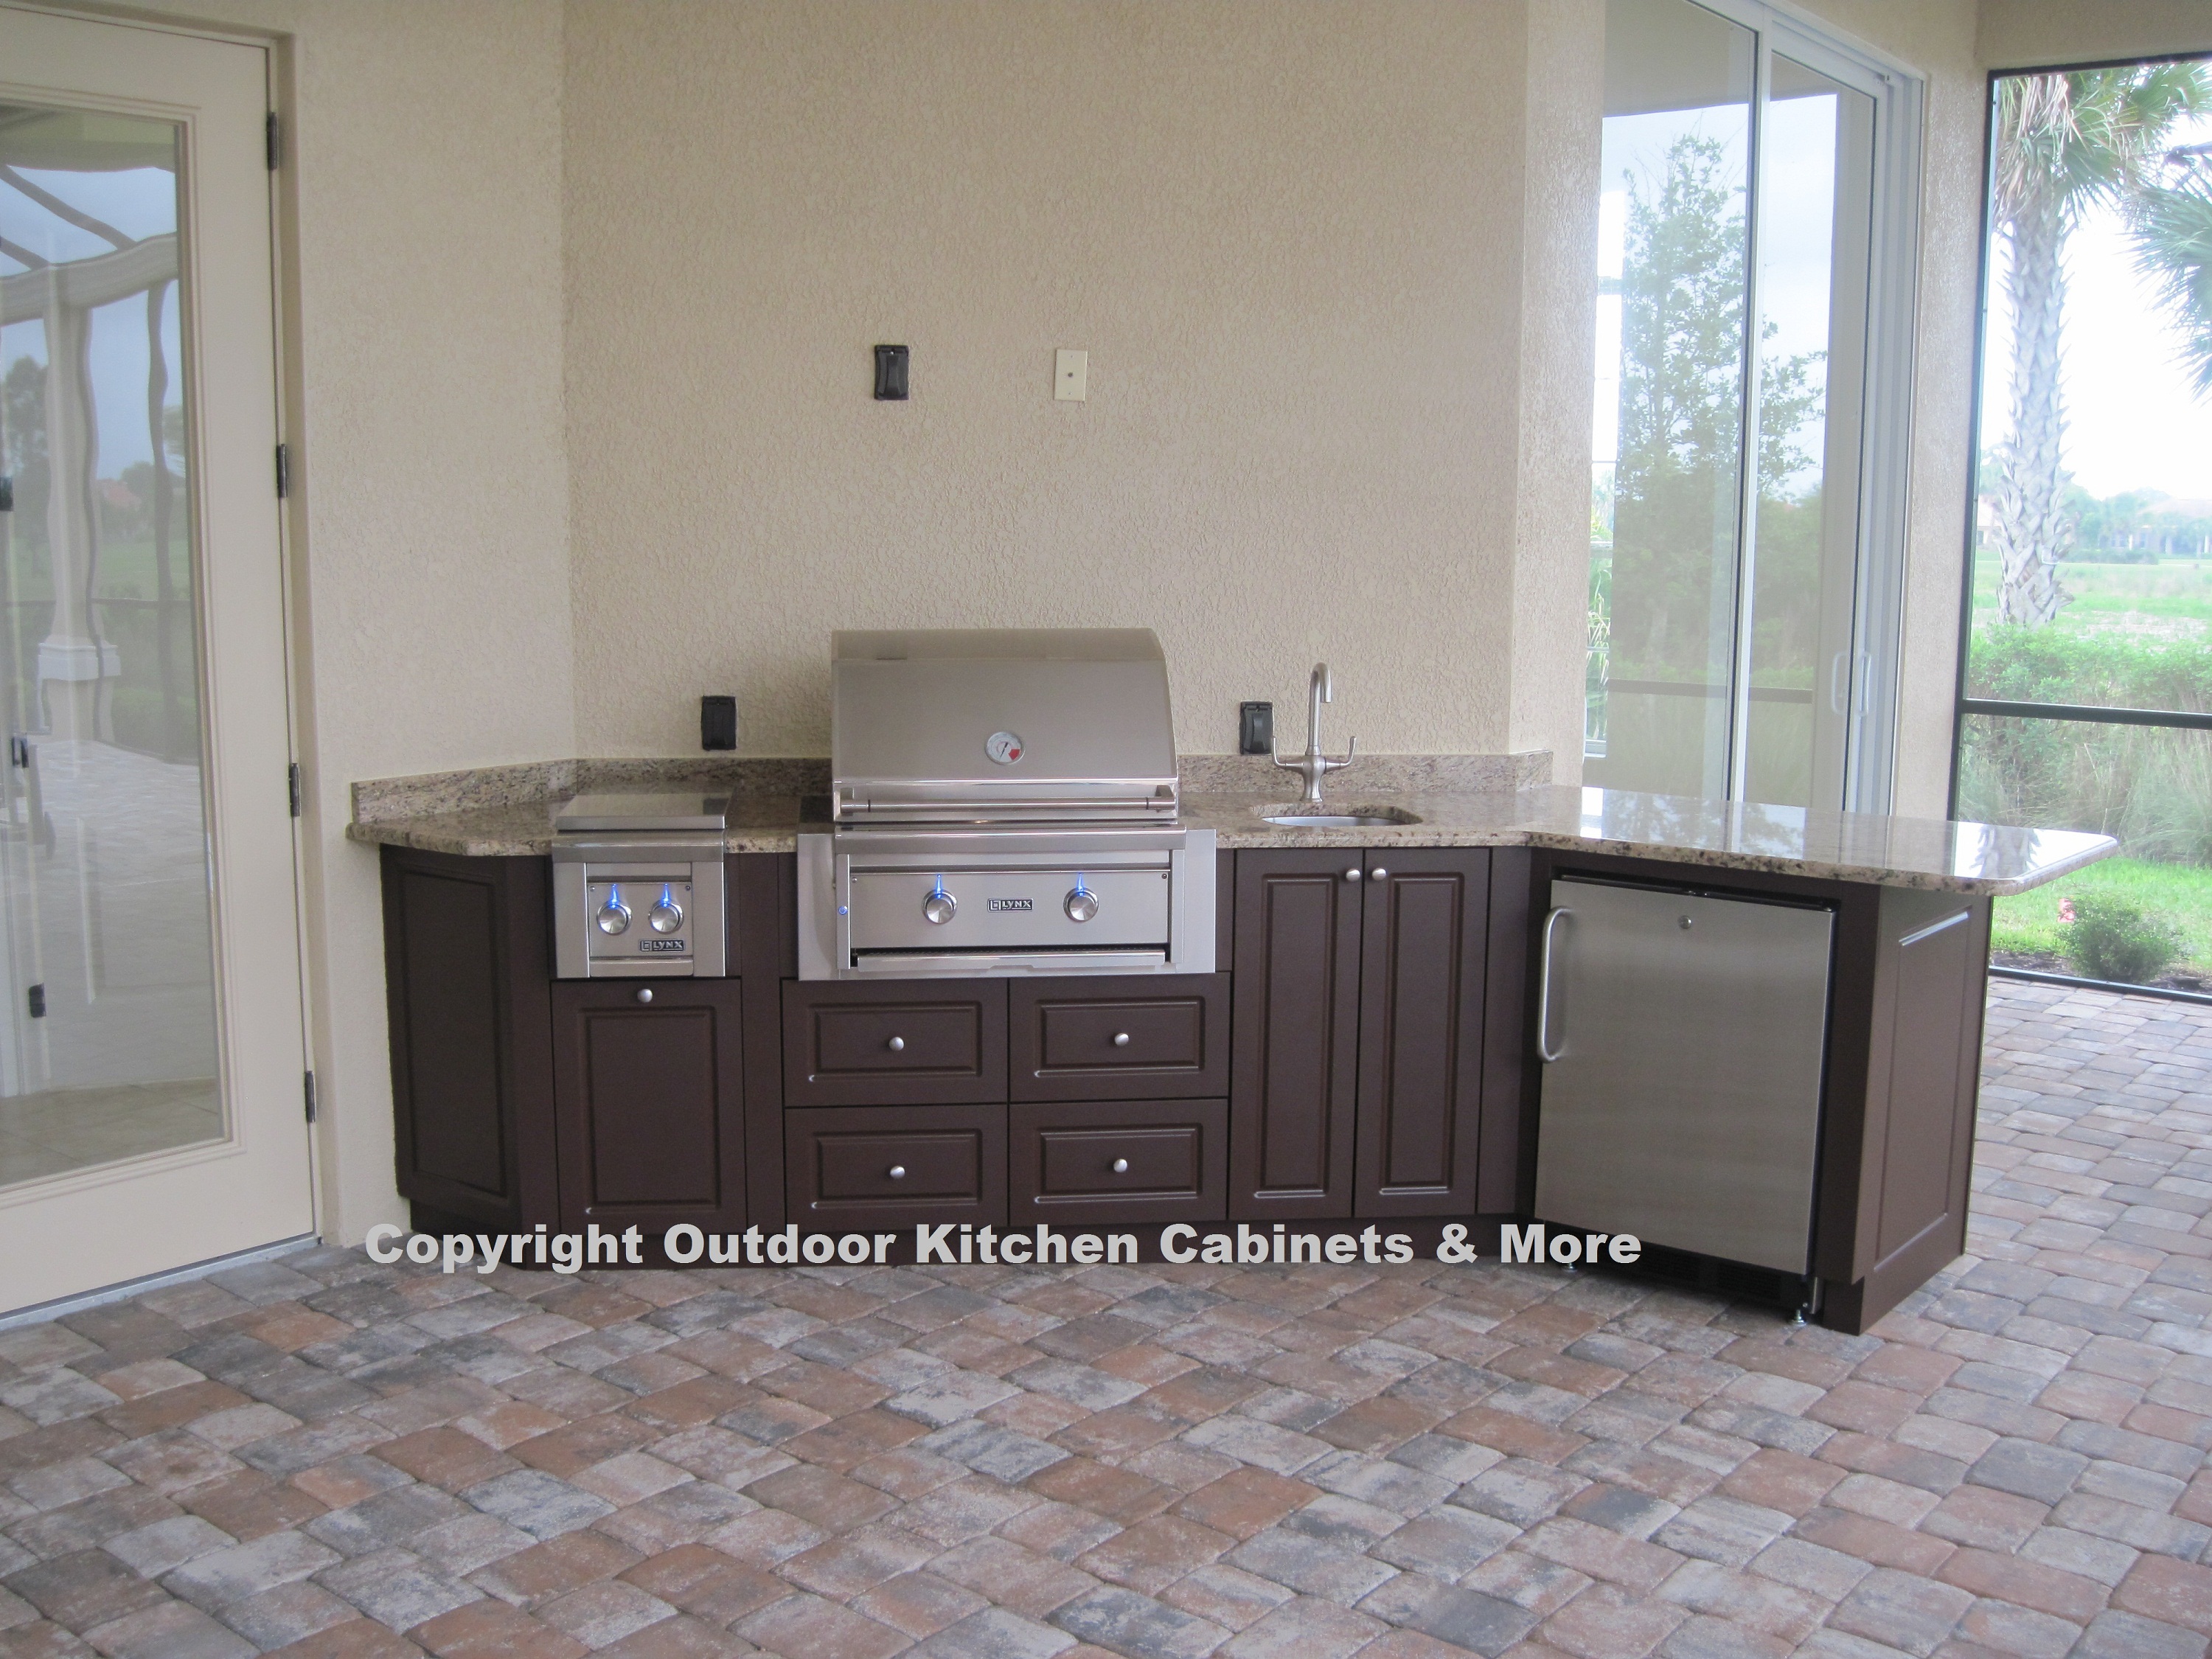 outdoor kitchen cabinets photo - 4